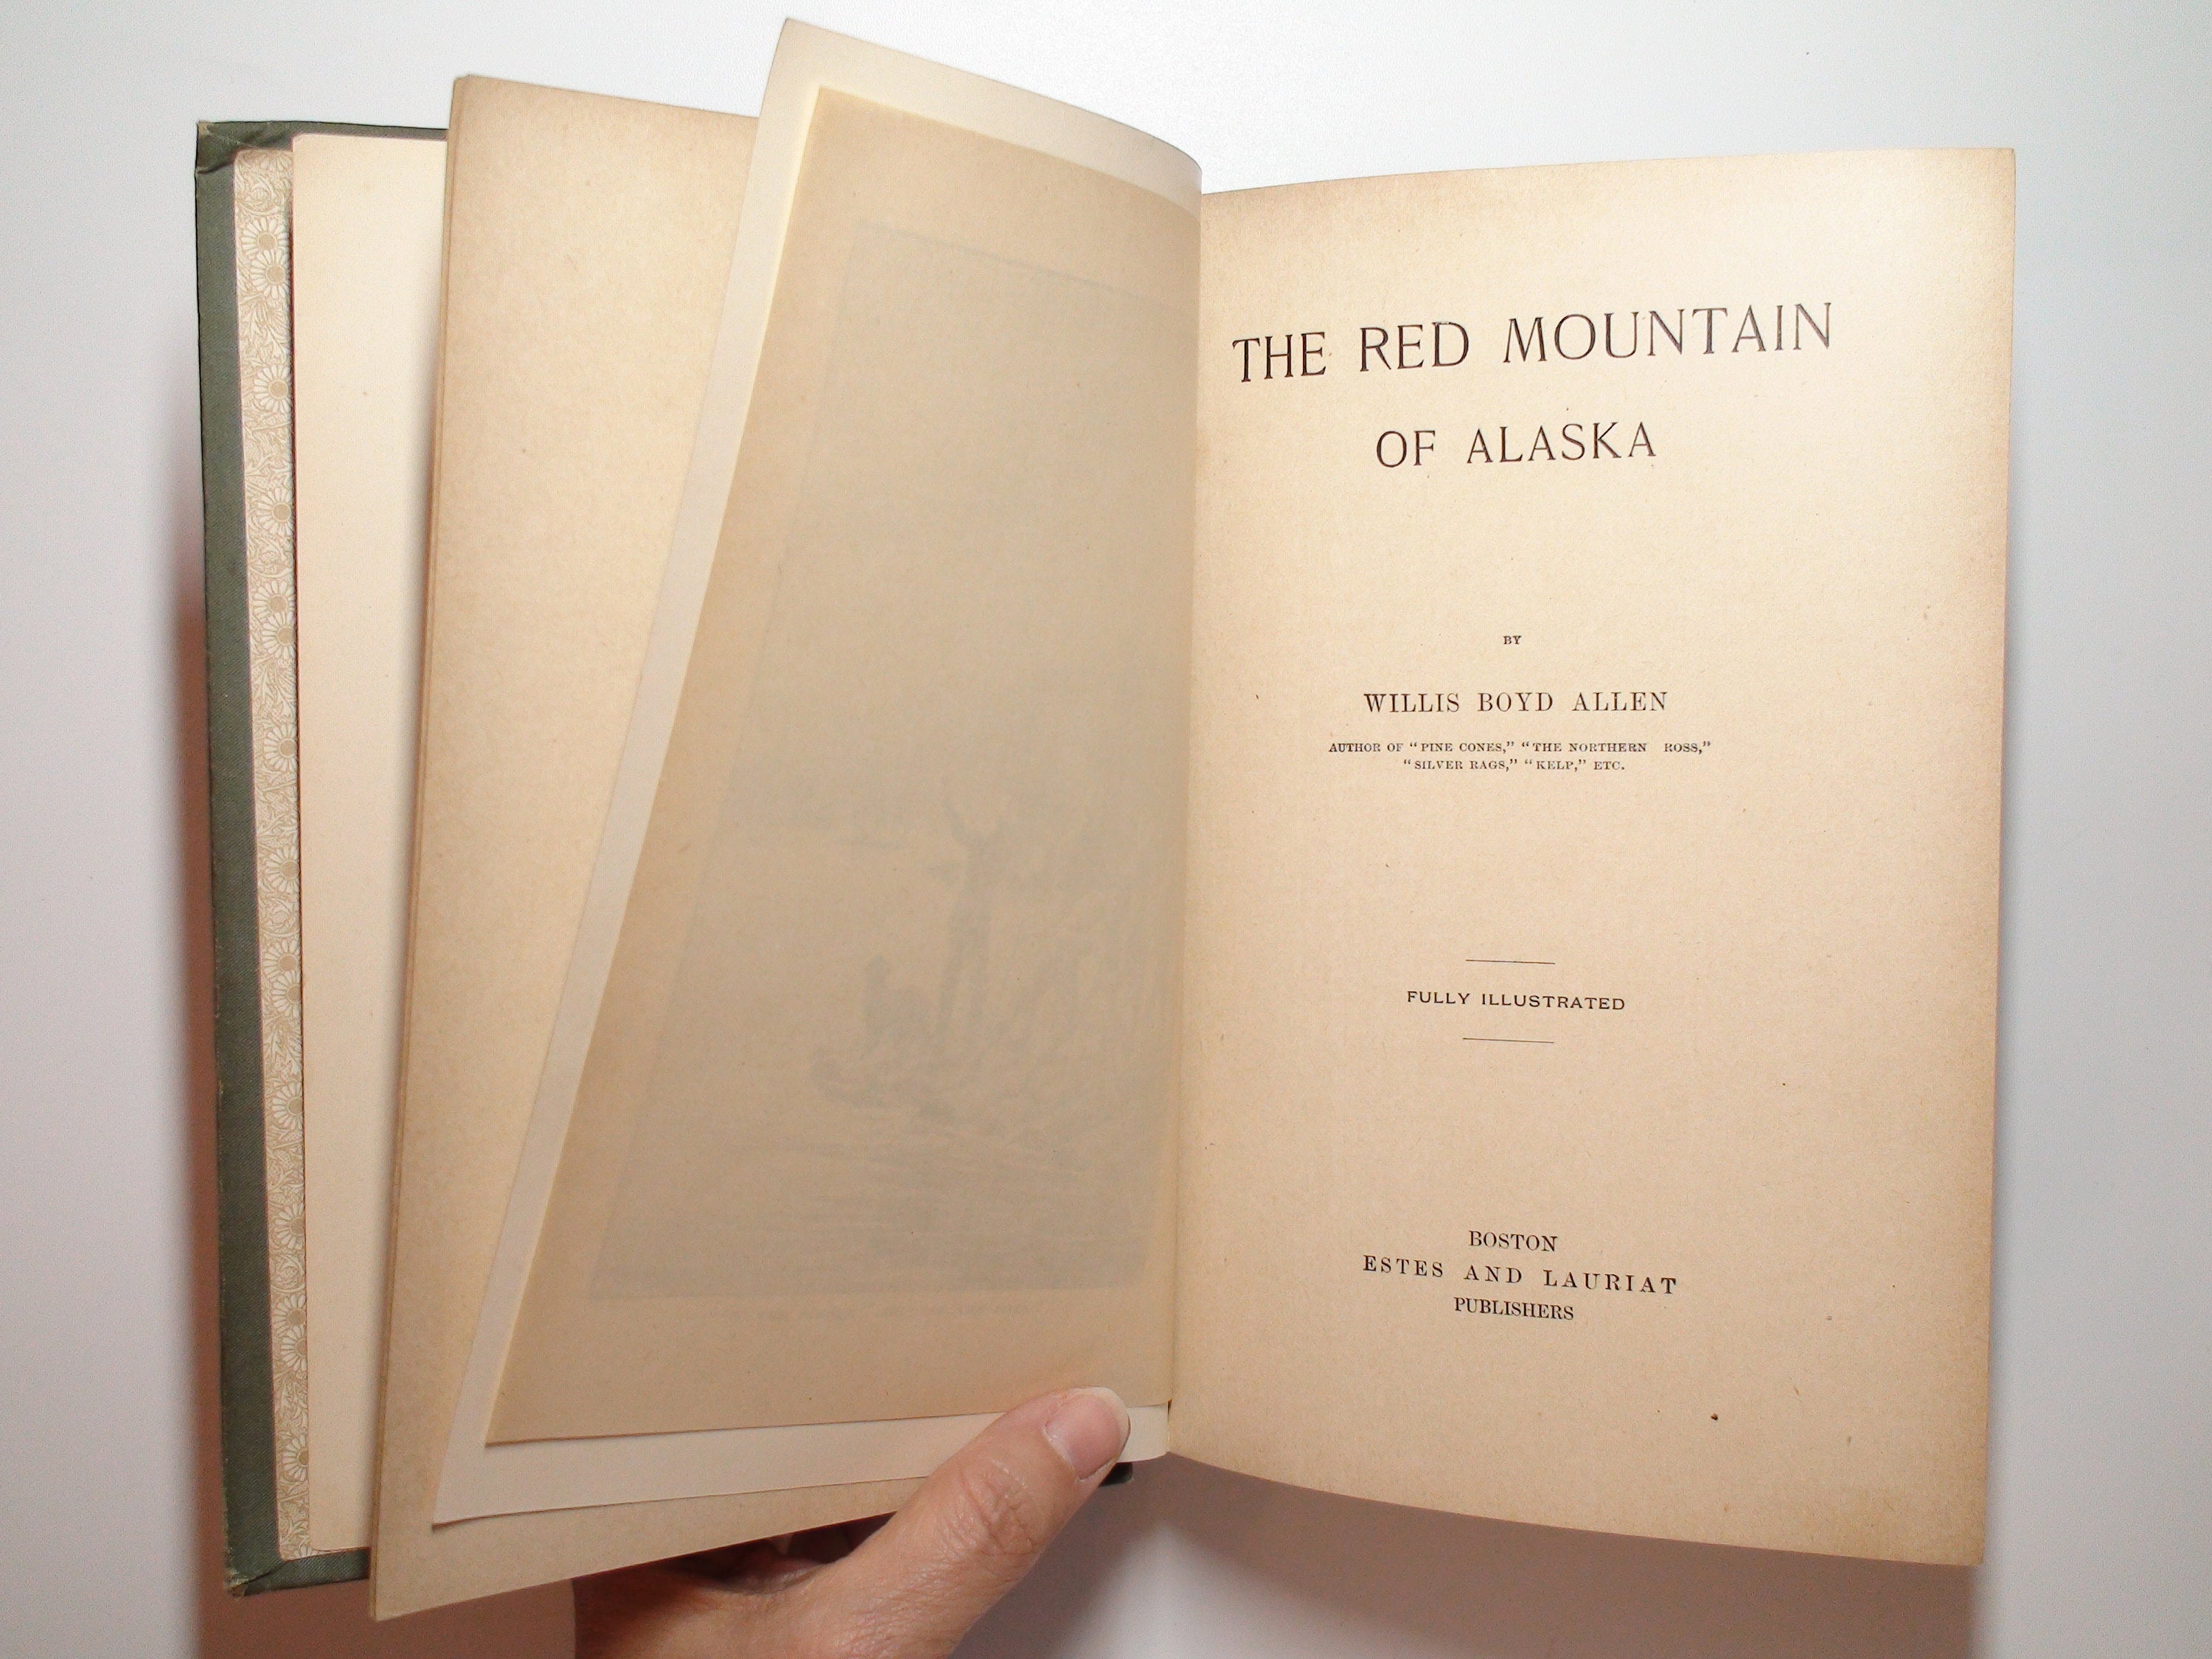 The Red Mountain of Alaska by Willis Boyd Allen, Illustrated, 1st Ed, 1899